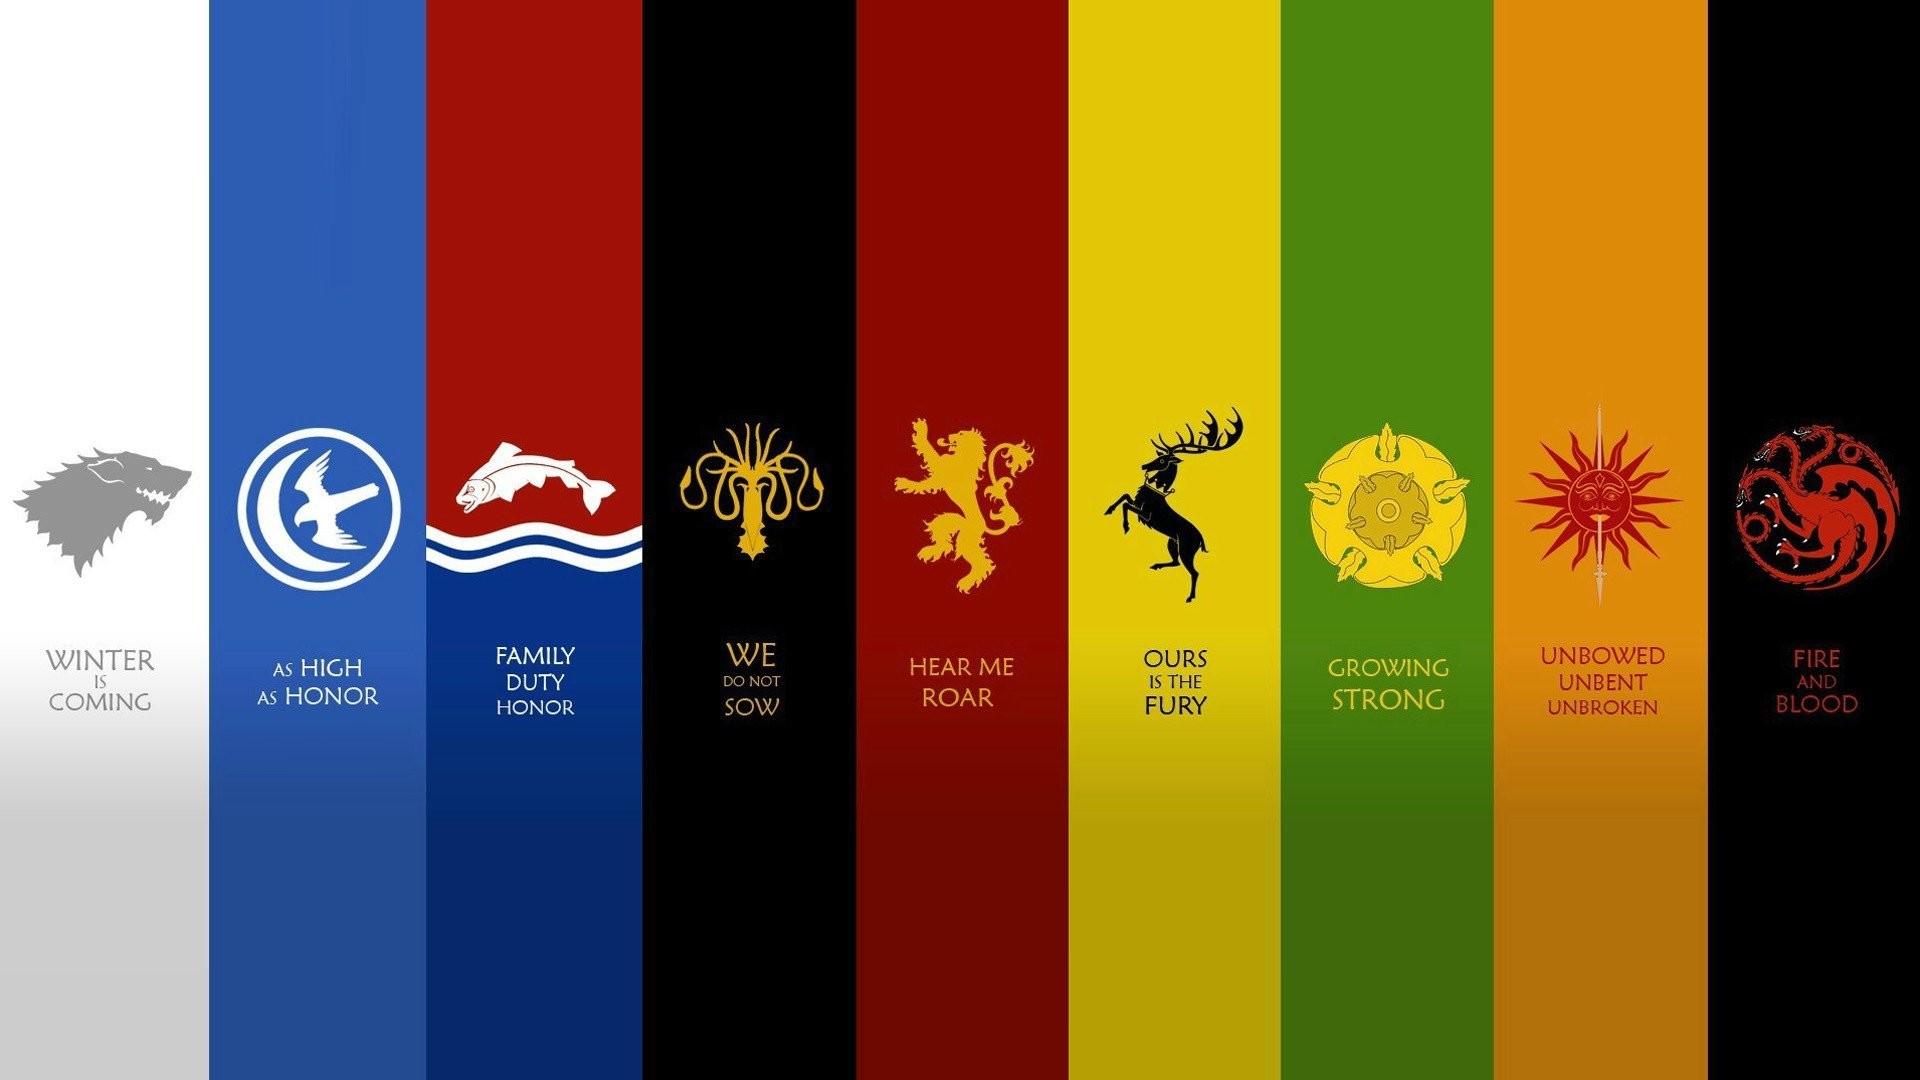 A Song Of Ice And Fire Emblems Fantasy Art Game Thrones George R. Martin House Arryn Baratheon Greyjoy Lannister Mormont Houses Stark Targaryen Tully Quotes